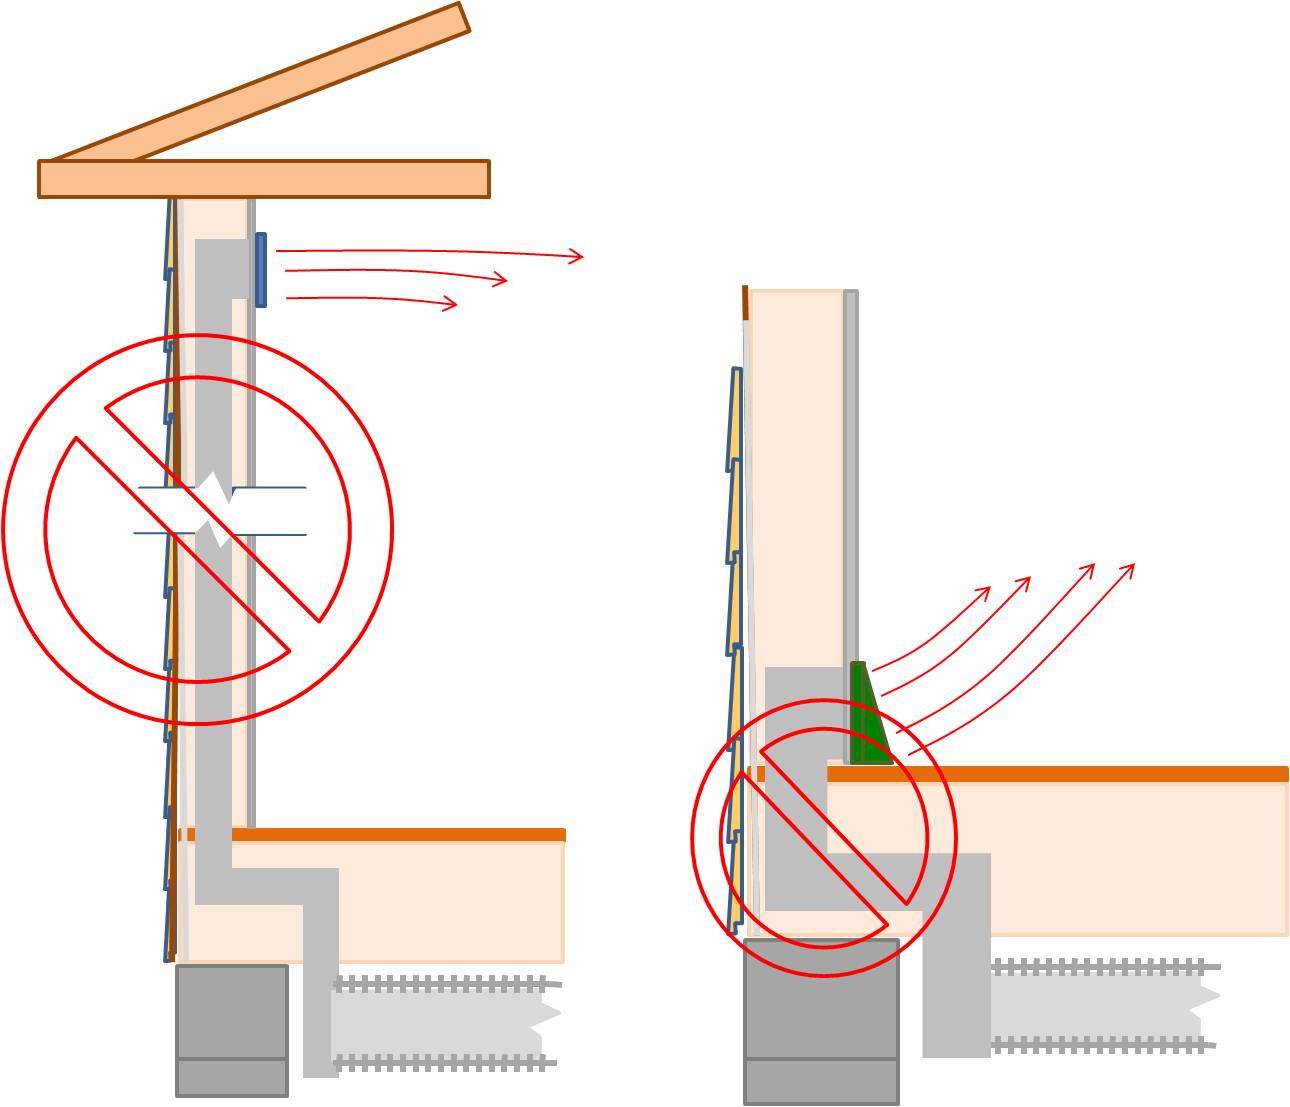 Ducts should not be located in exterior wall cavities